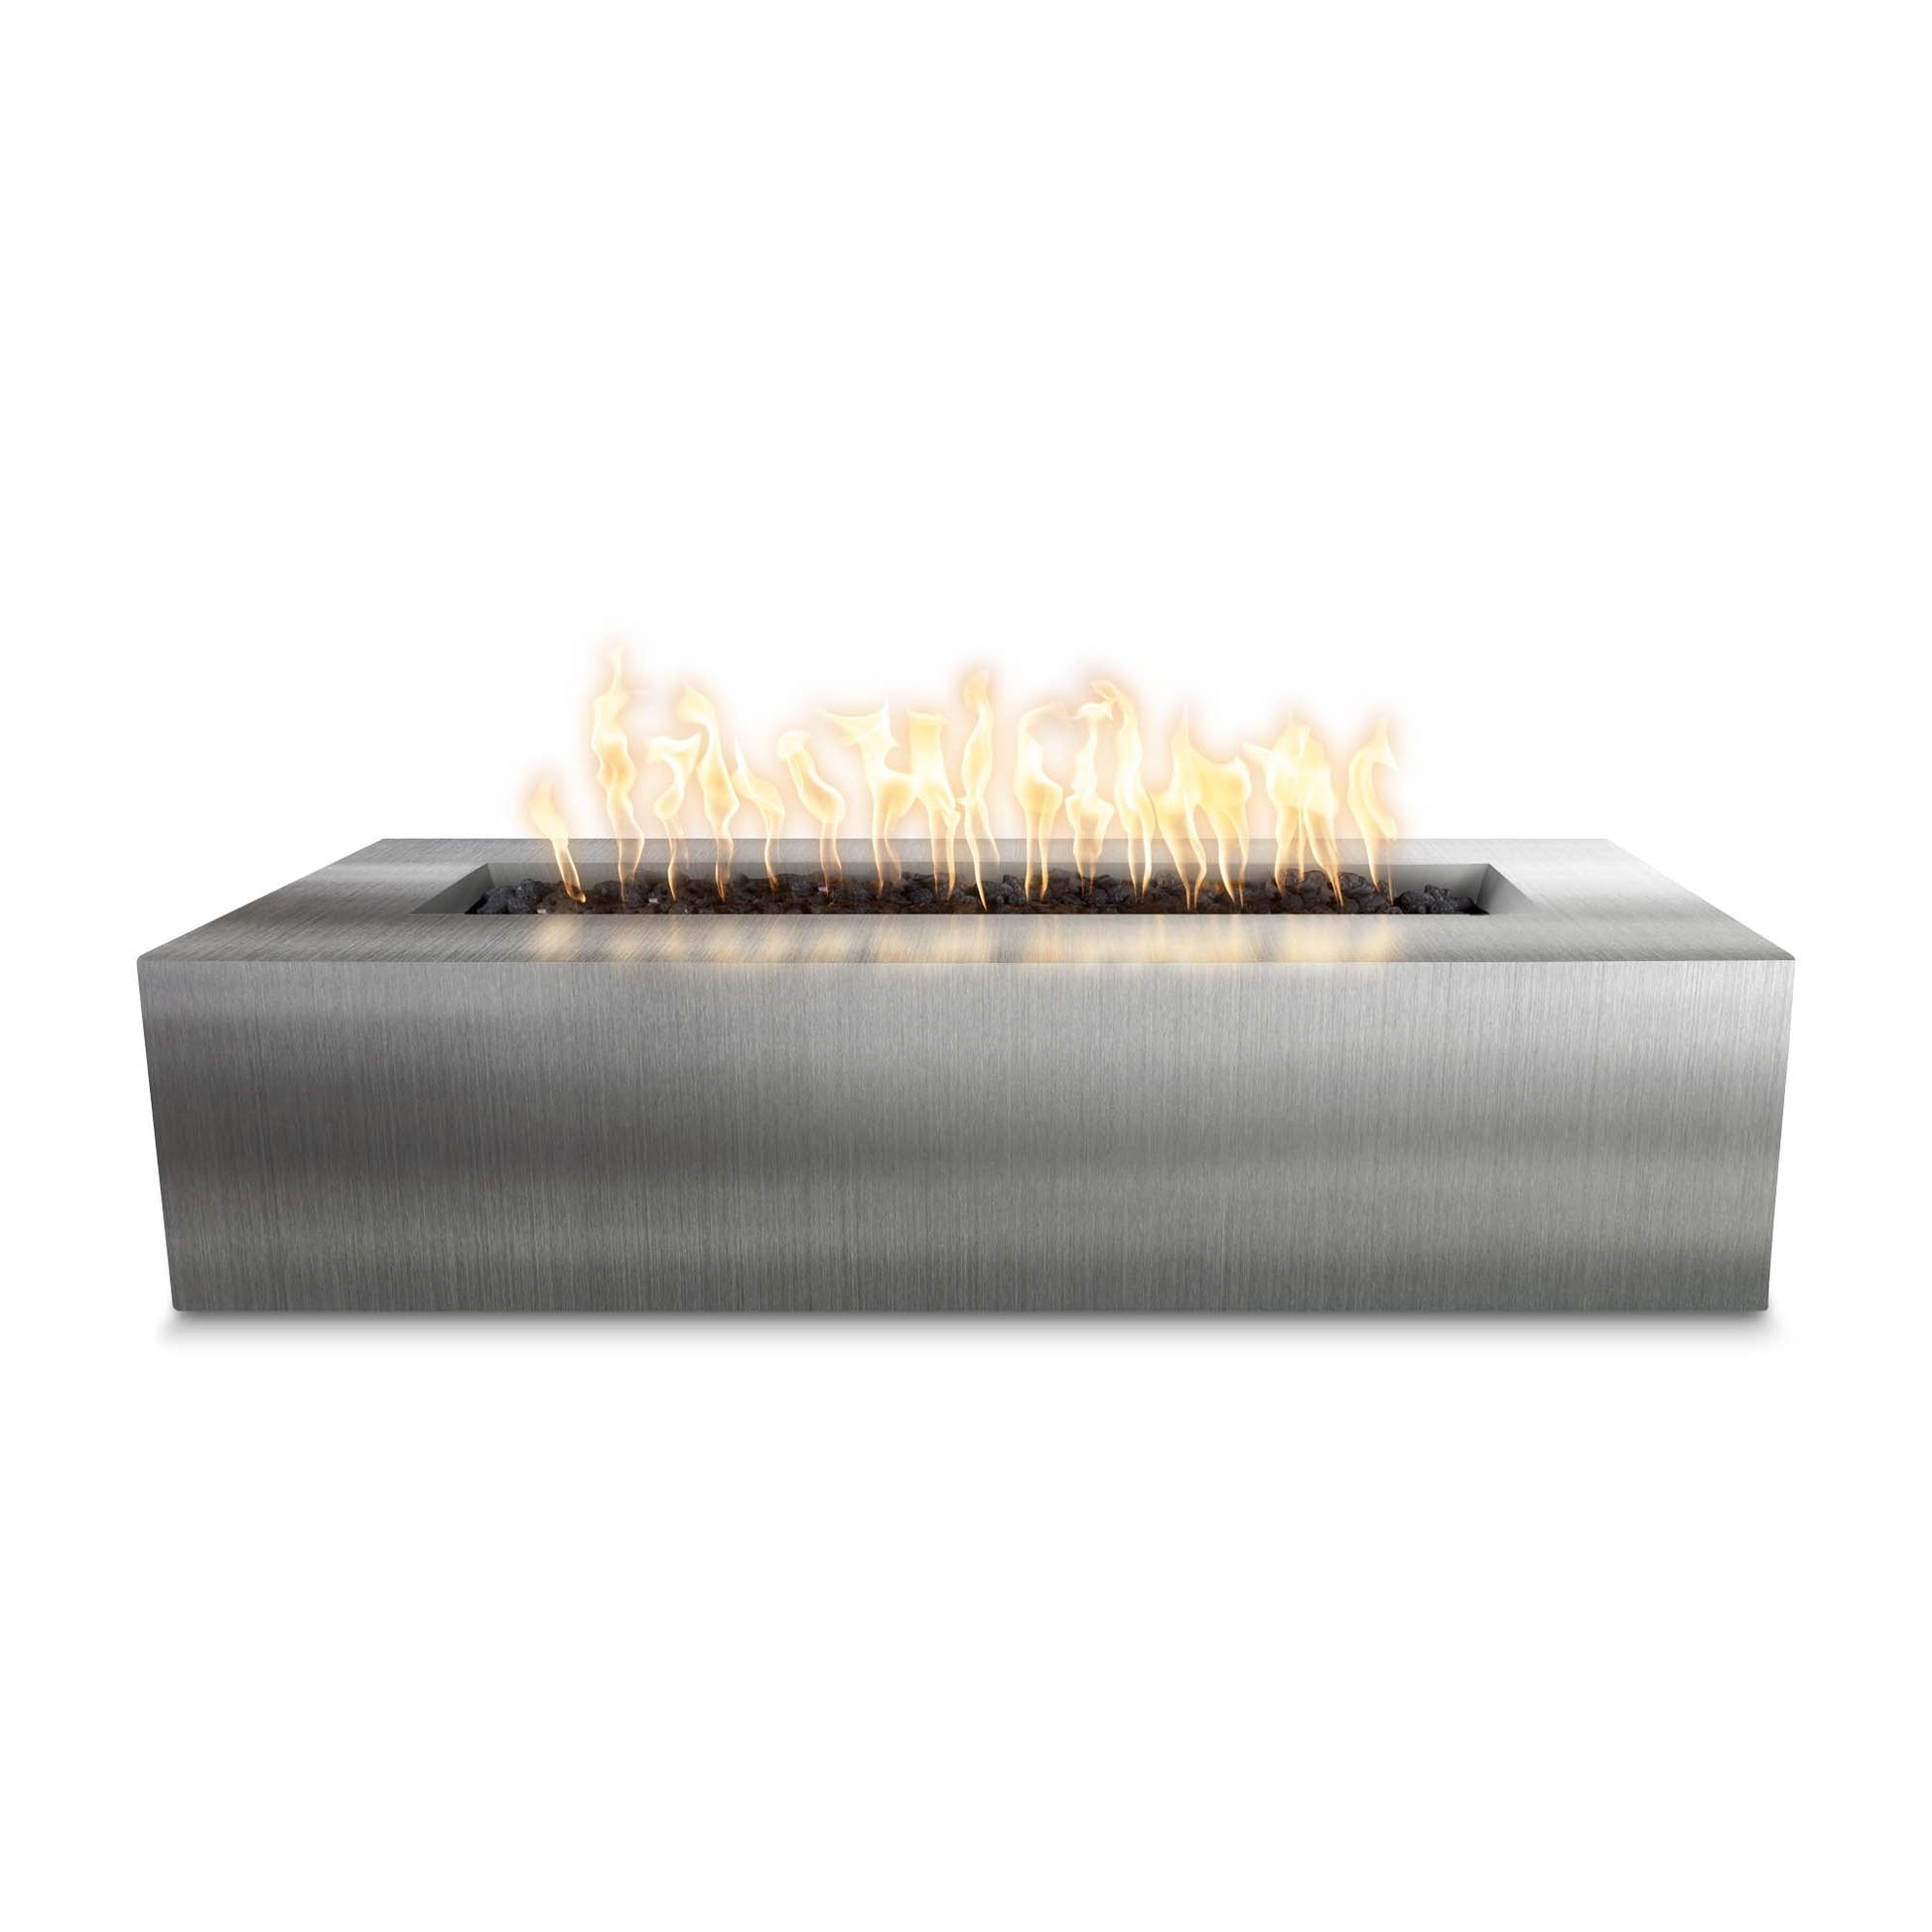 The Outdoor Plus Rectangular Regal 60" Stainless Steel Liquid Propane Fire Pit with 12V Electronic Ignition